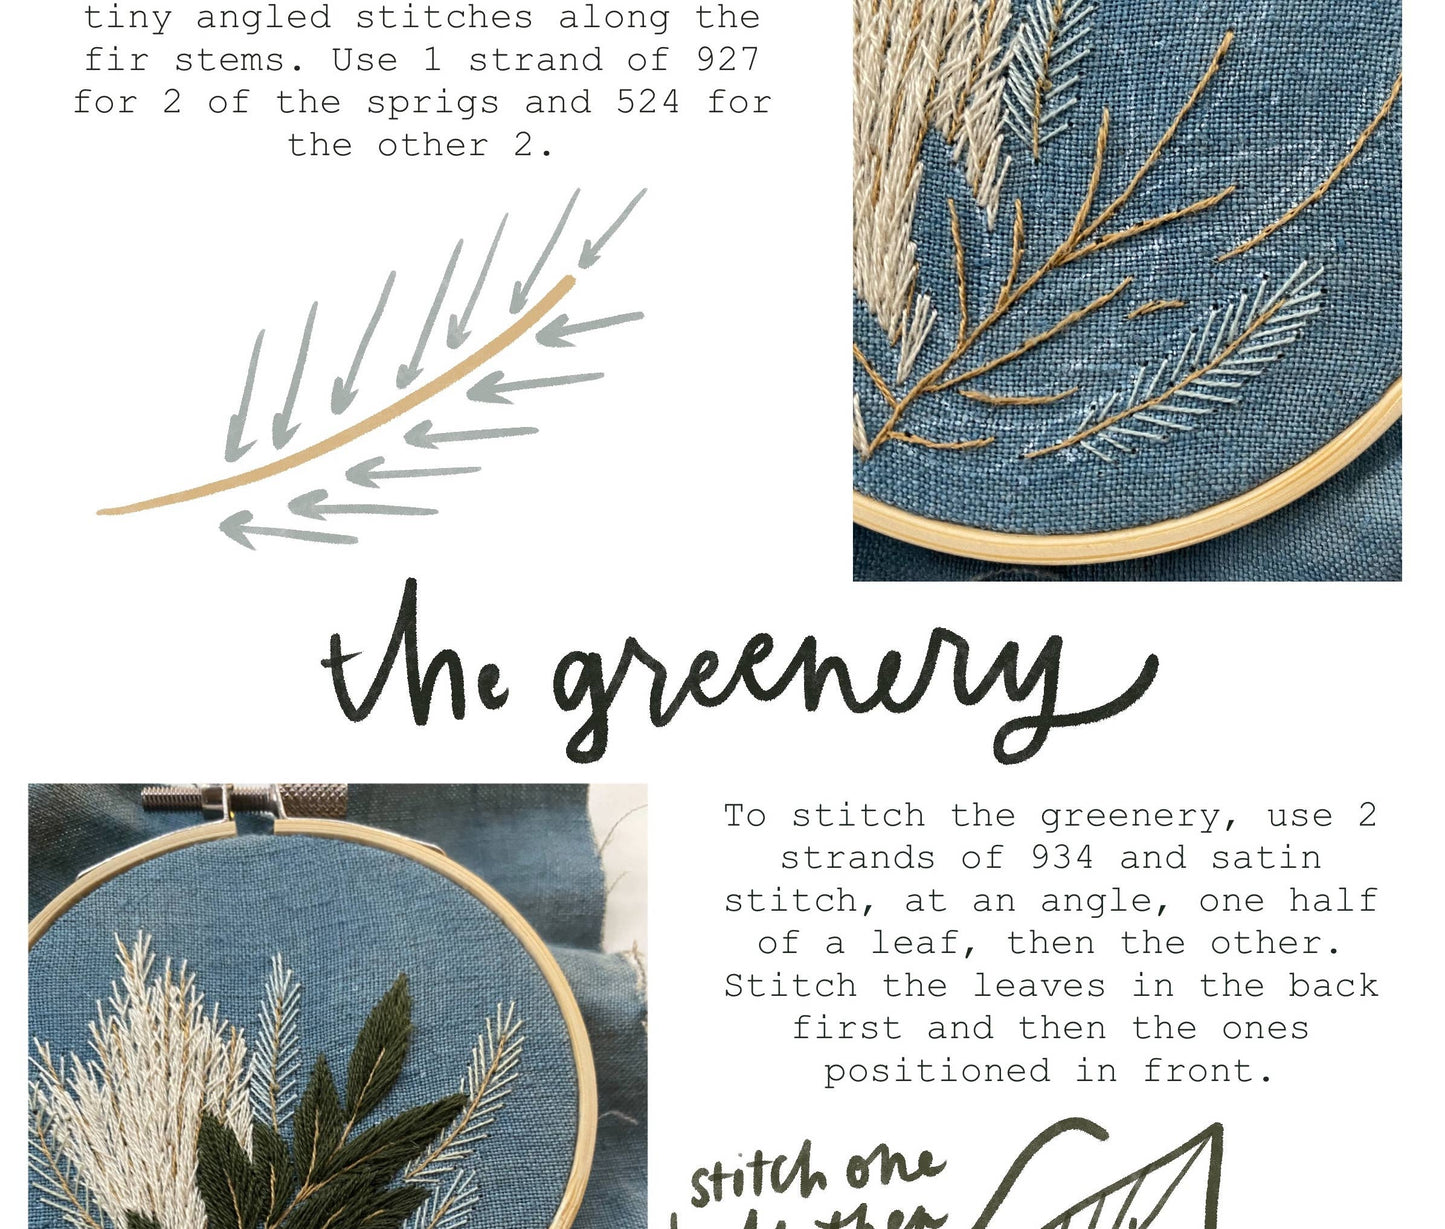 Pampas Grass and Circumstance embroidery kit